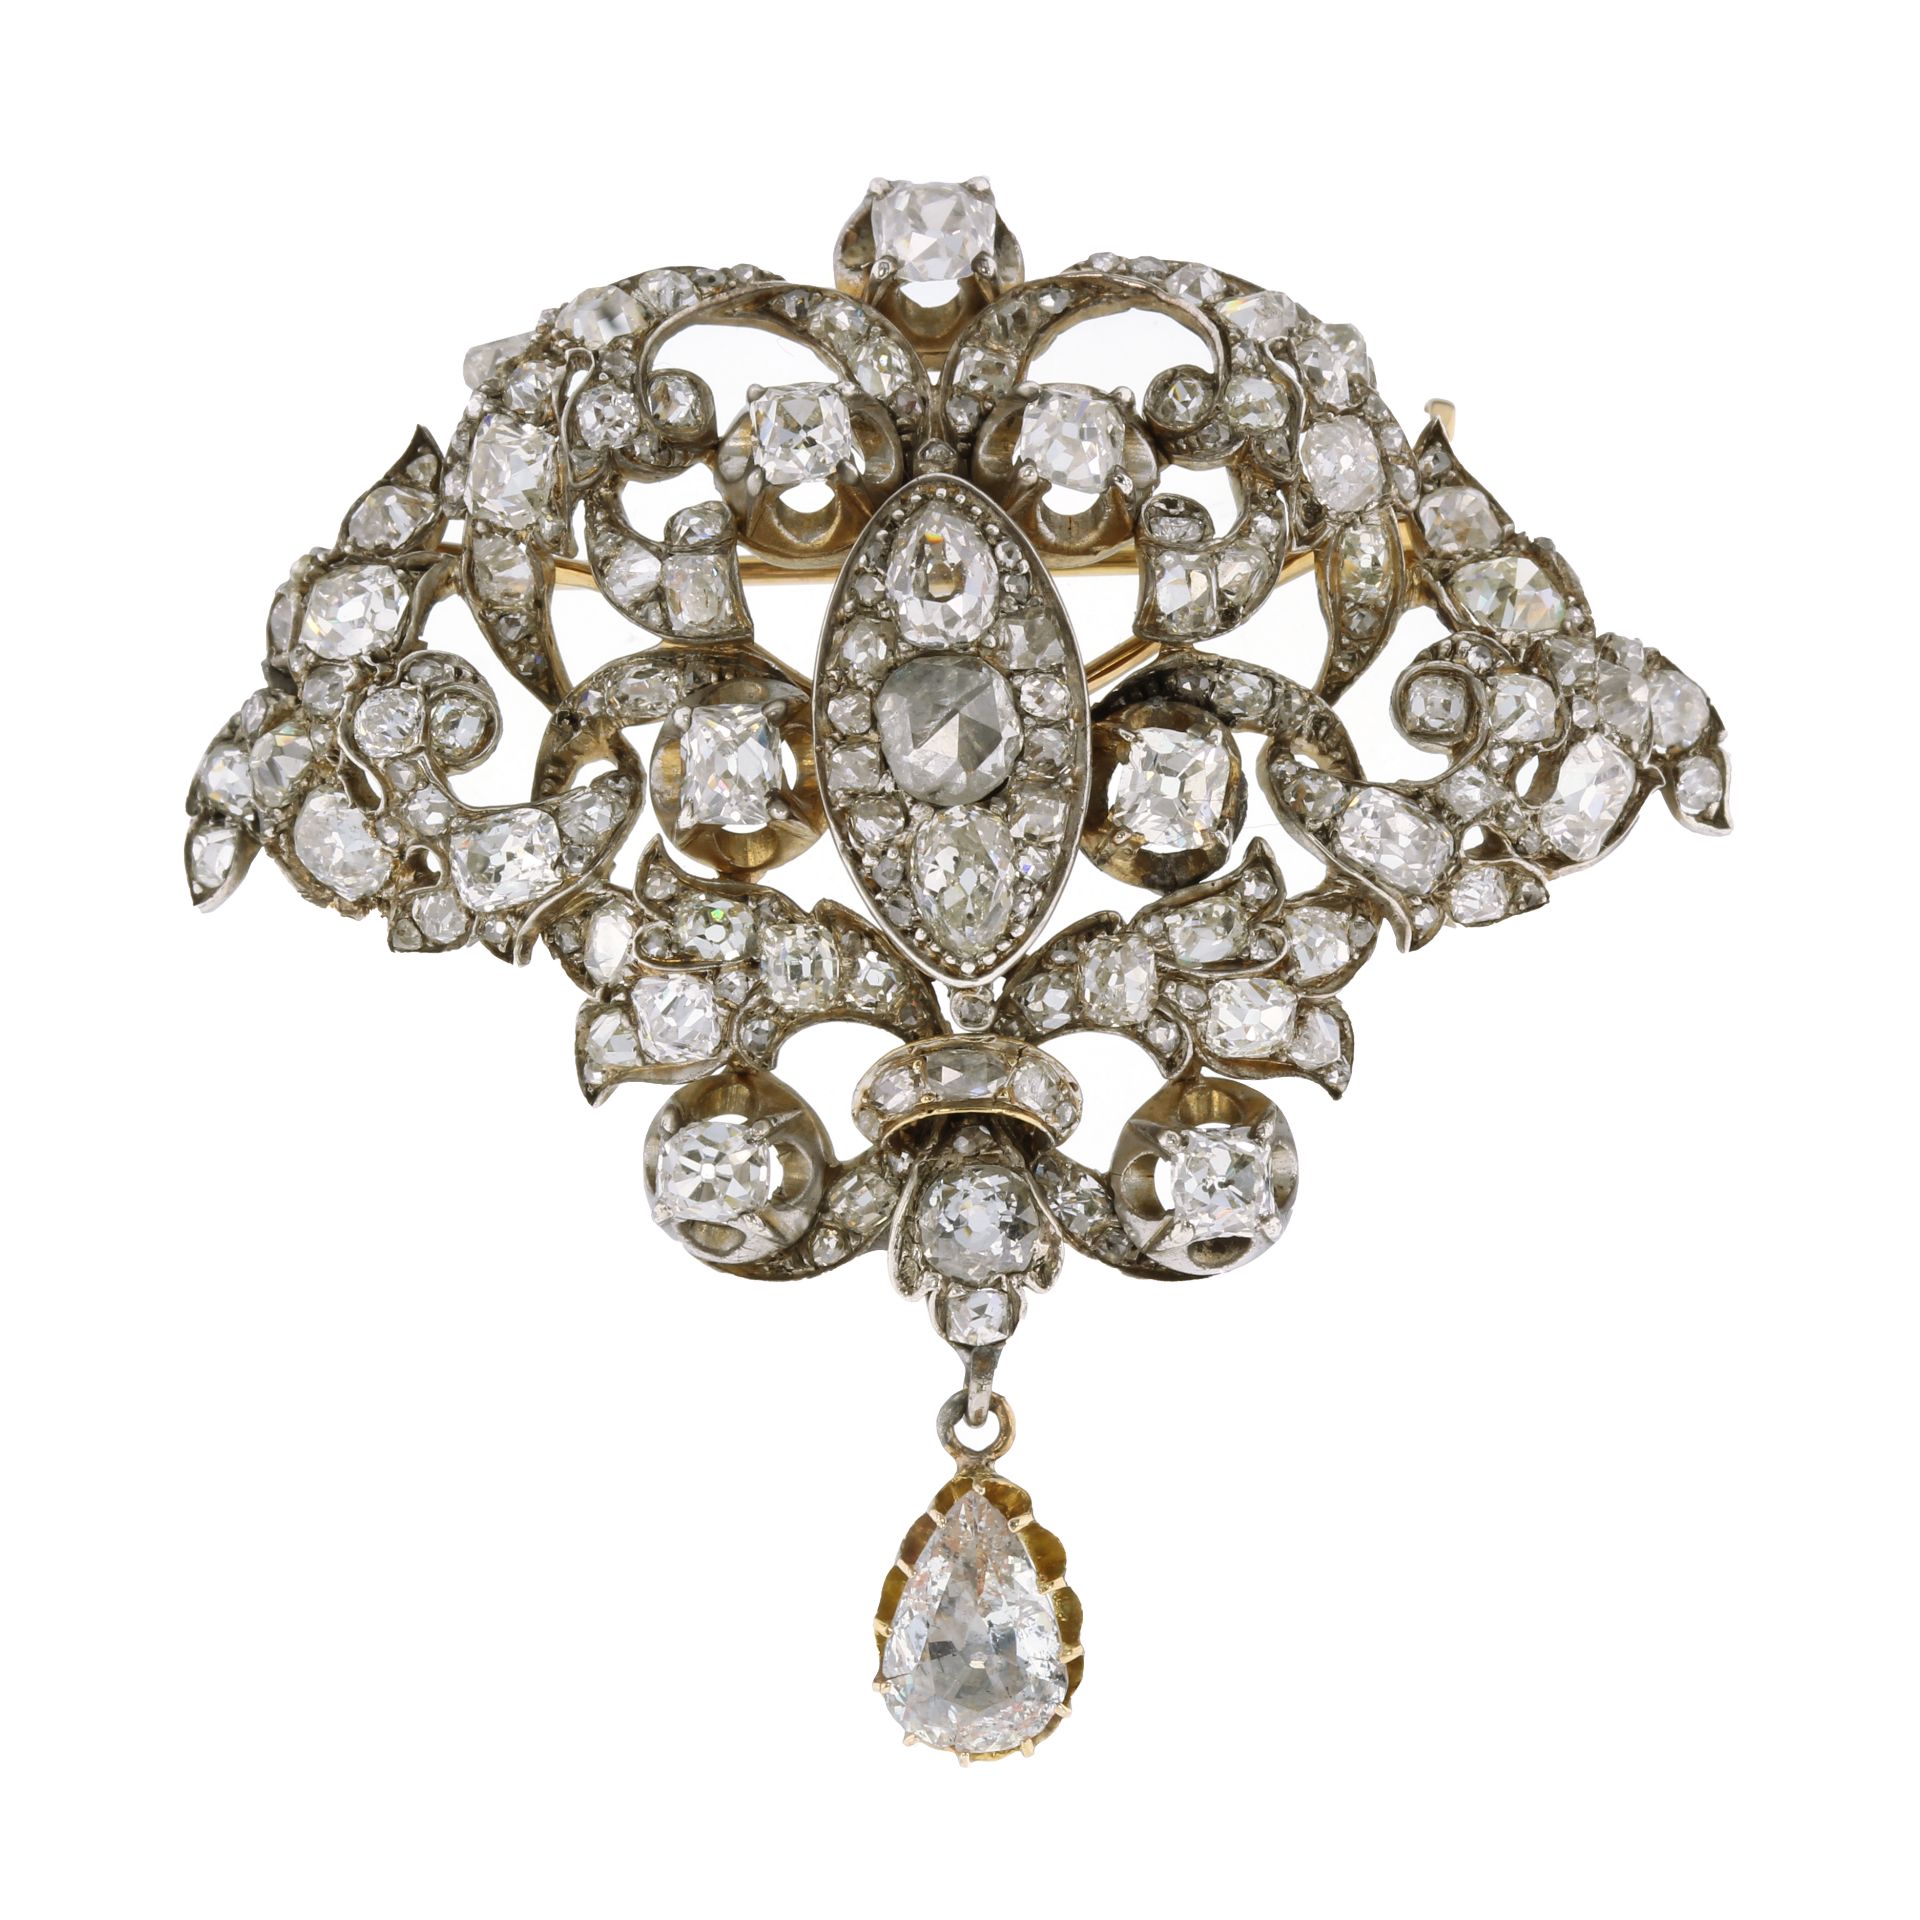 AN ANTIQUE DIAMOND BROOCH, CIRCA 1870 in high carat yellow gold and silver, the foliate scroll